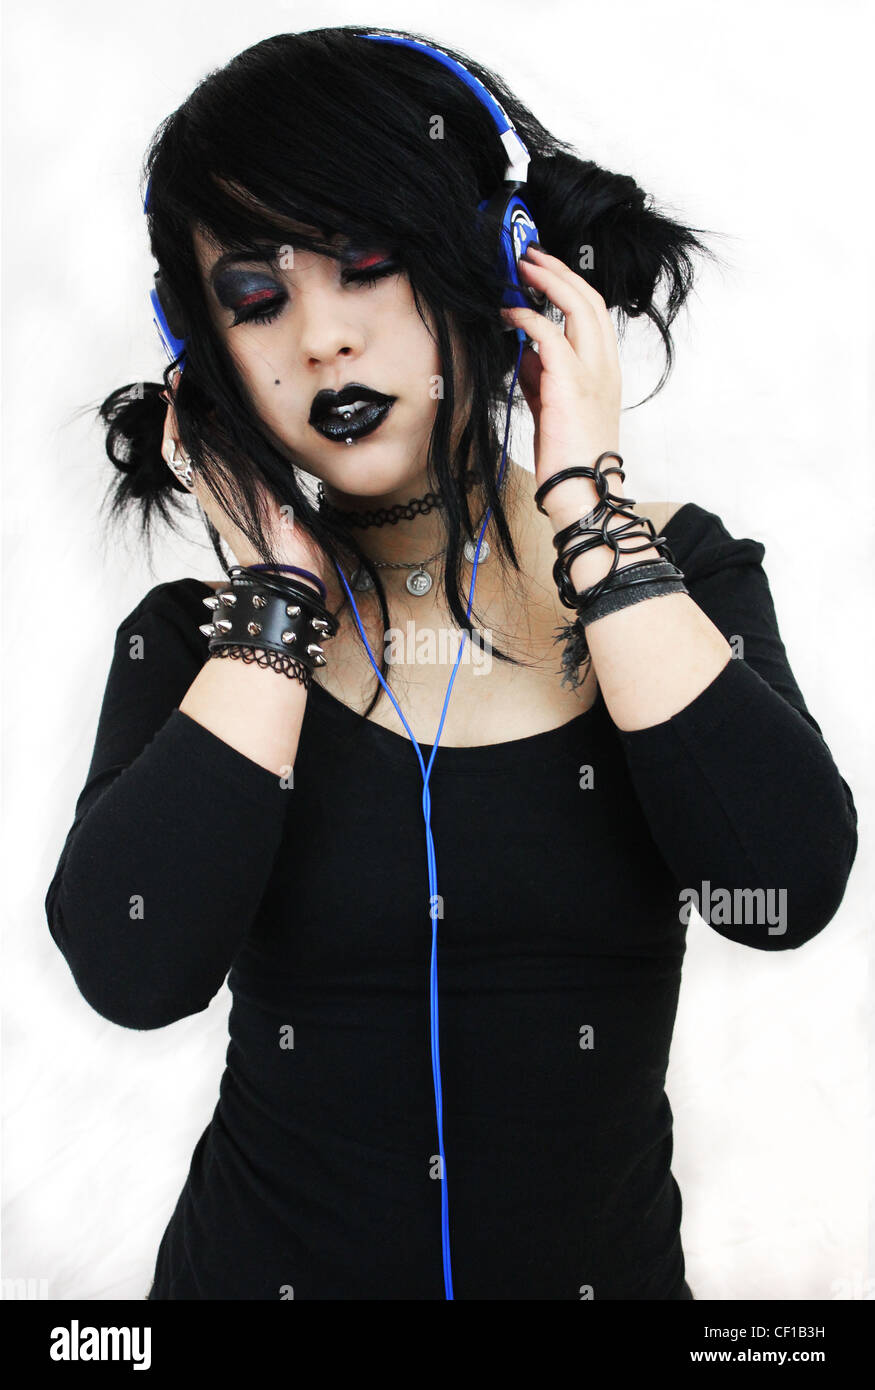 Young woman dressed in alternative fashion wearing blue headphones. Stock Photo